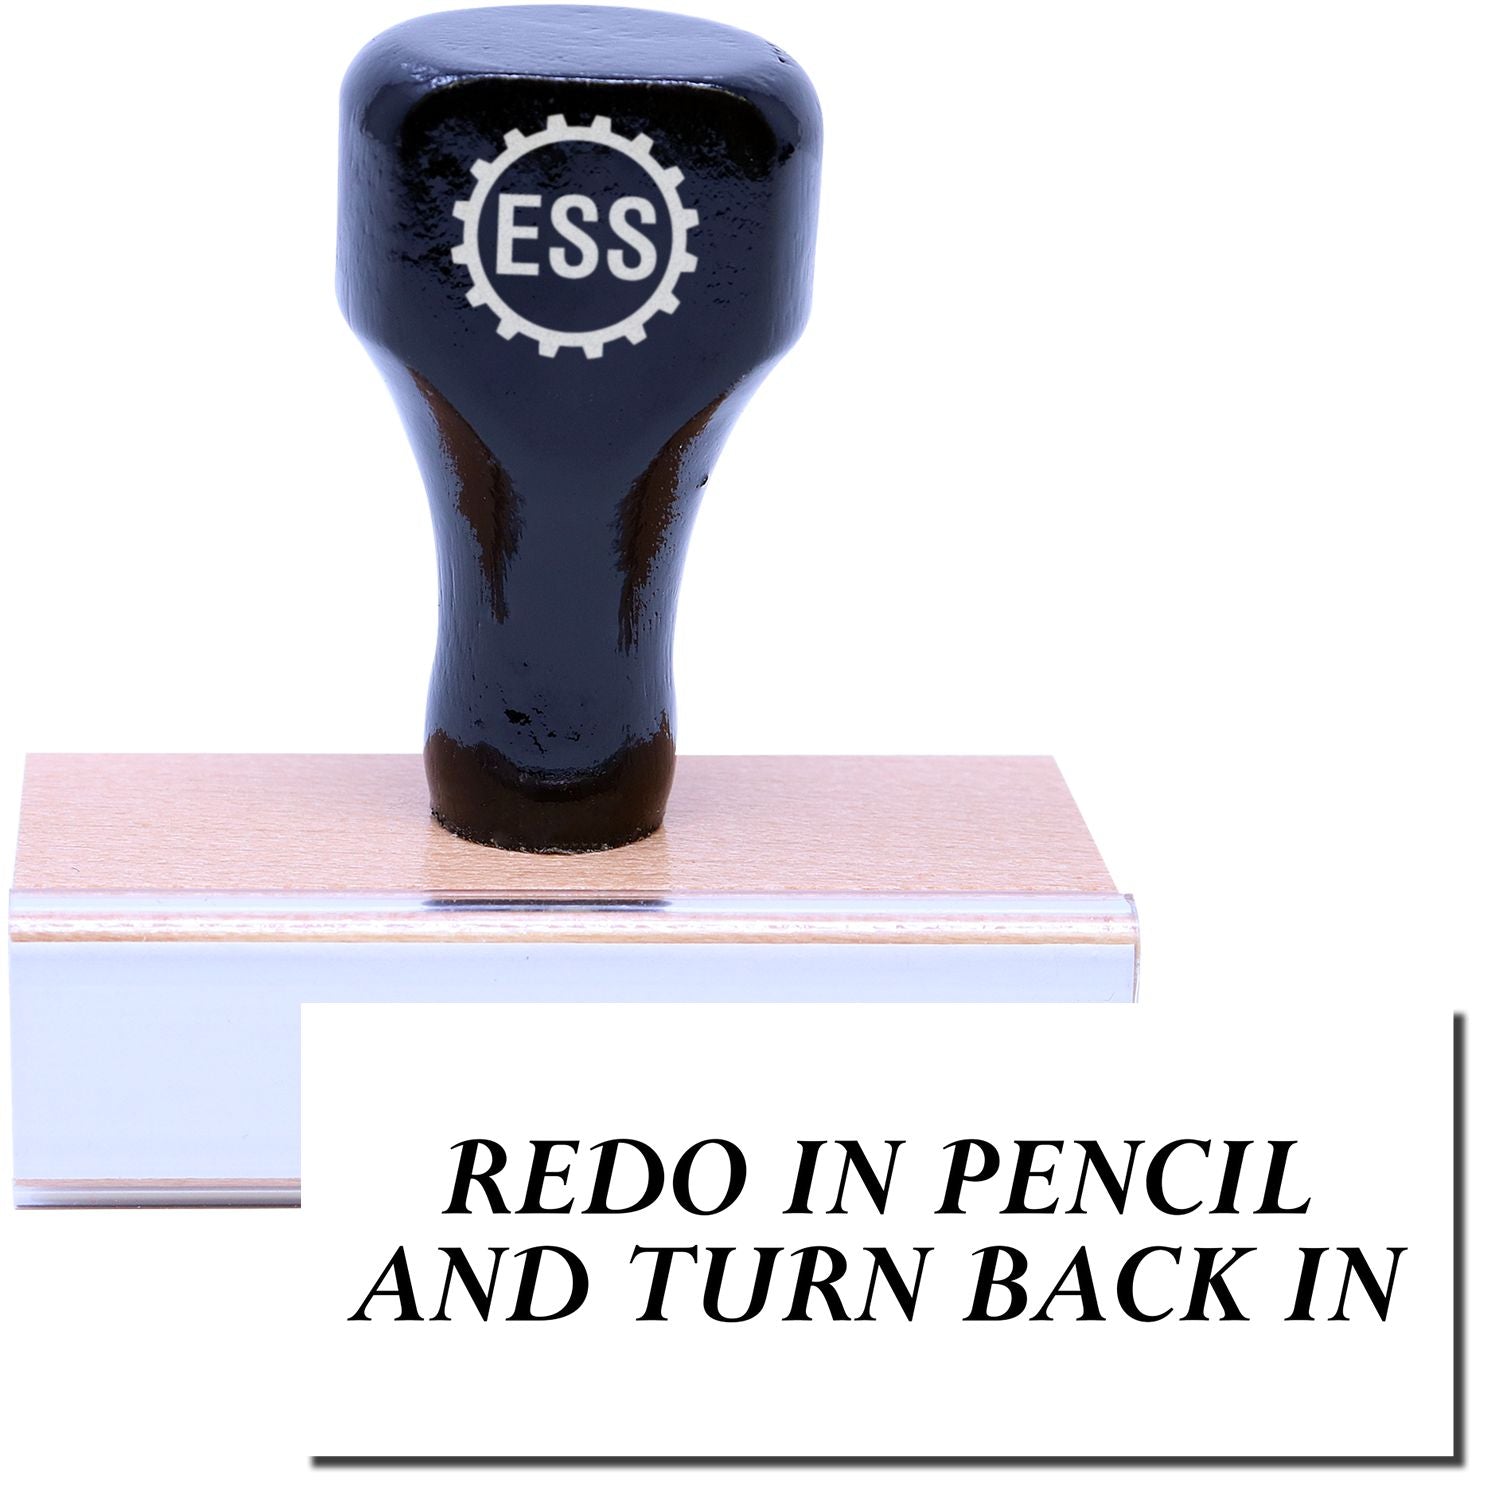 A stock office rubber stamp with a stamped image showing how the text "REDO IN PENCIL AND TURN BACK IN" in a large font is displayed after stamping.